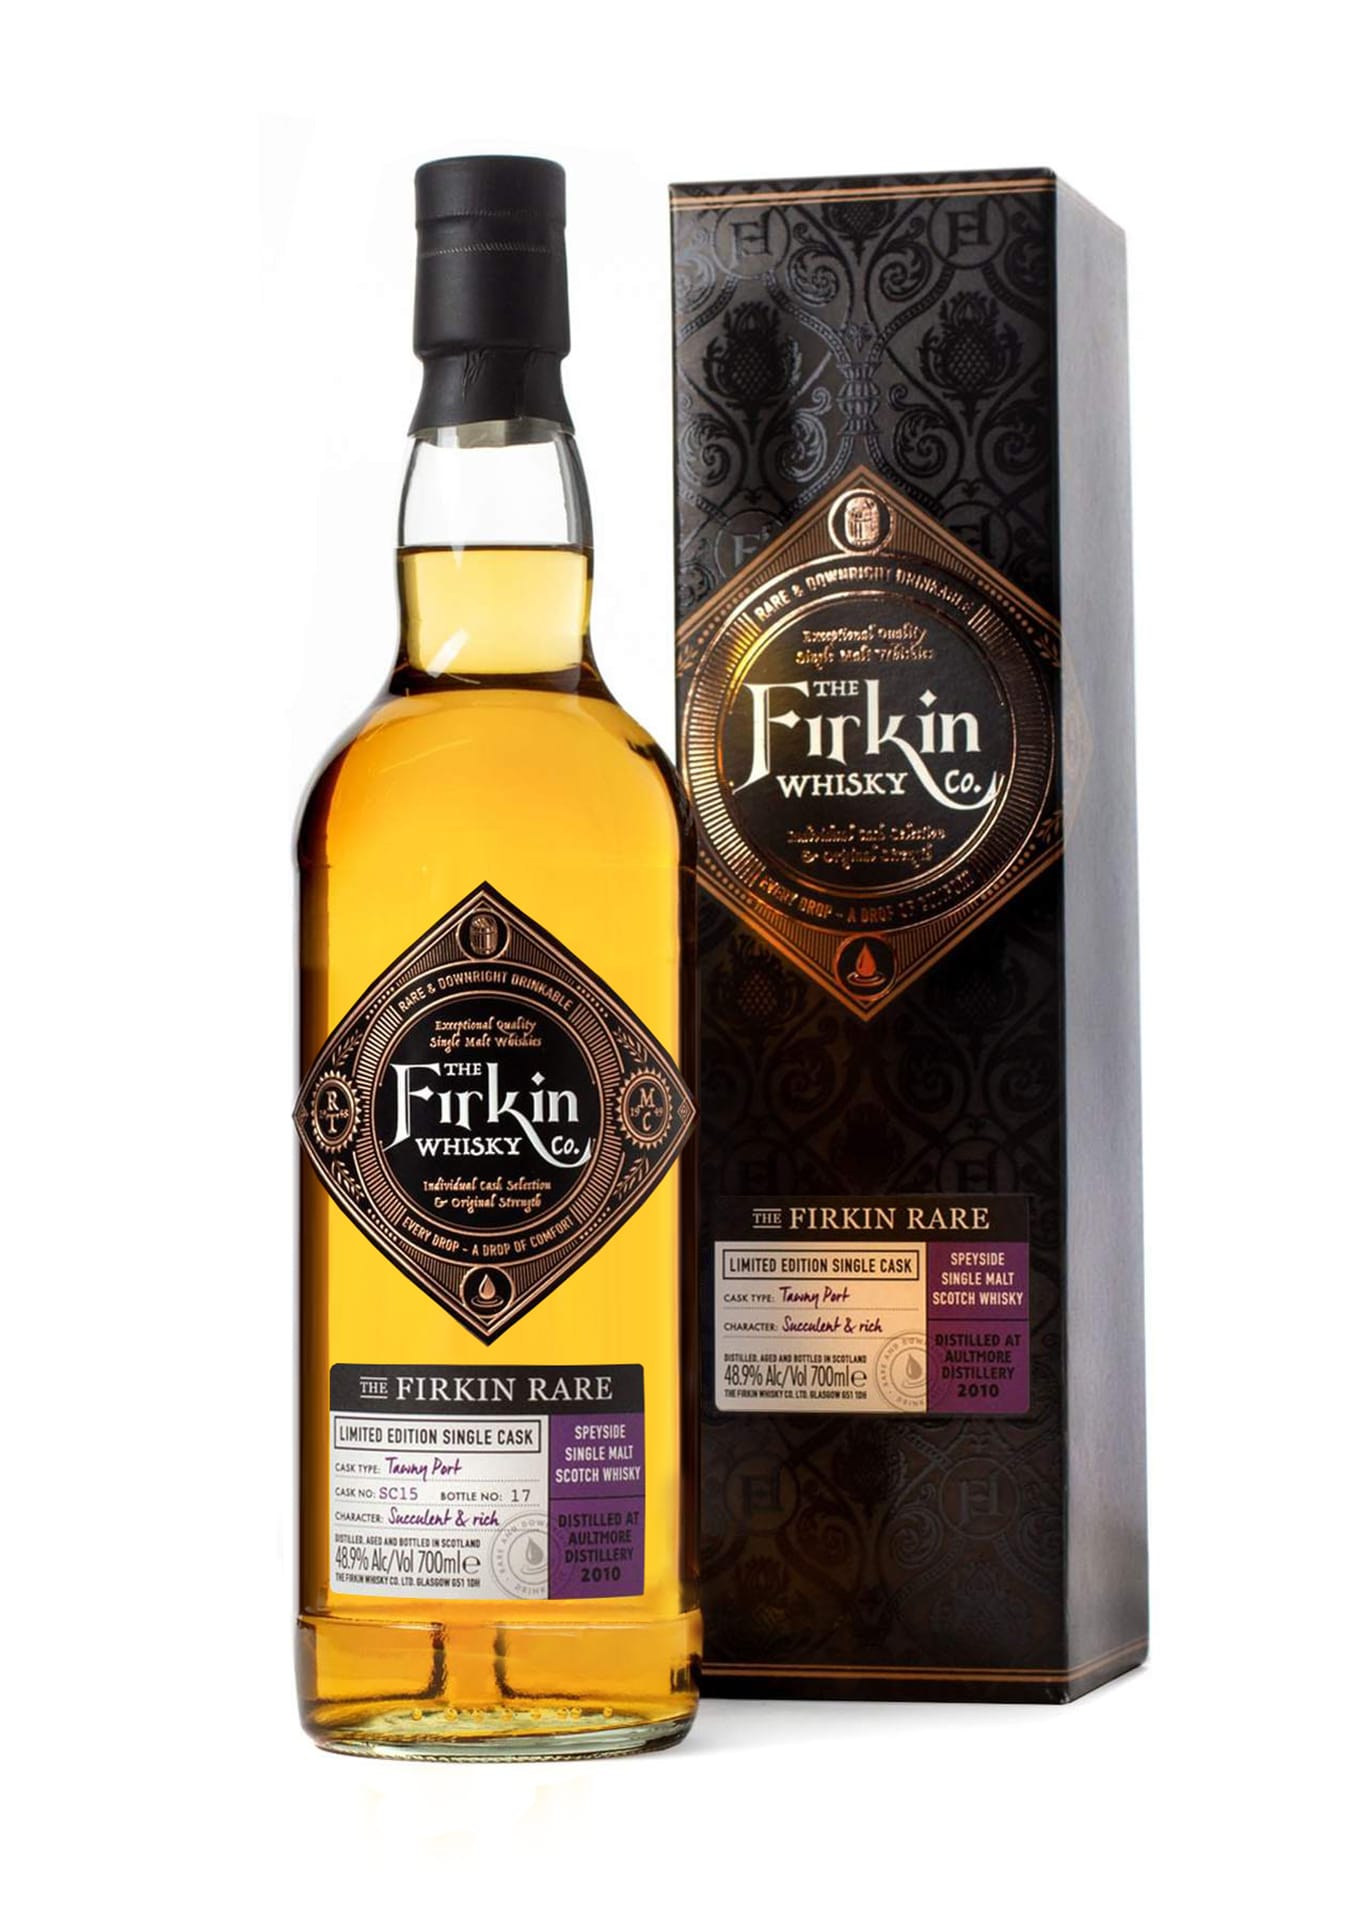 Firkin Rare Aultmore Whisky in Tawny Port Cask Bottle and Box